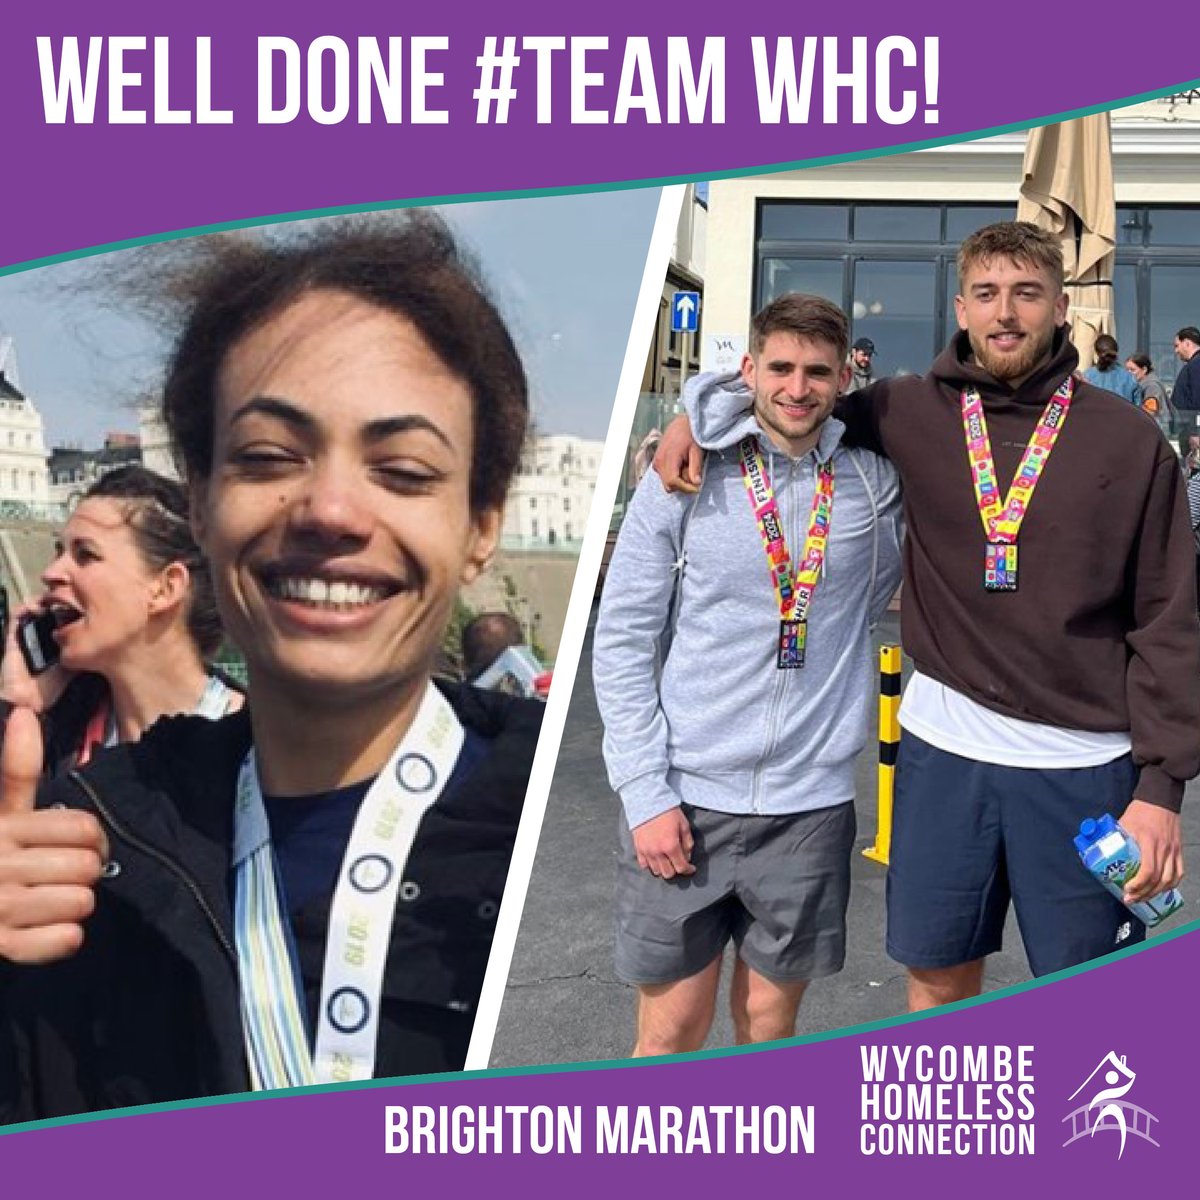 Congratulations to Deborah and friends Elliot and Adam #TeamWHC who competed The Brighton Marathon on Sunday 7 April to raise money for Wycombe Homeless Connection! It’s not too late to sponsor them: Deborah: justgiving.com/page/deborah-w… Elliot and Adam: justgiving.com/page/elliot-he…